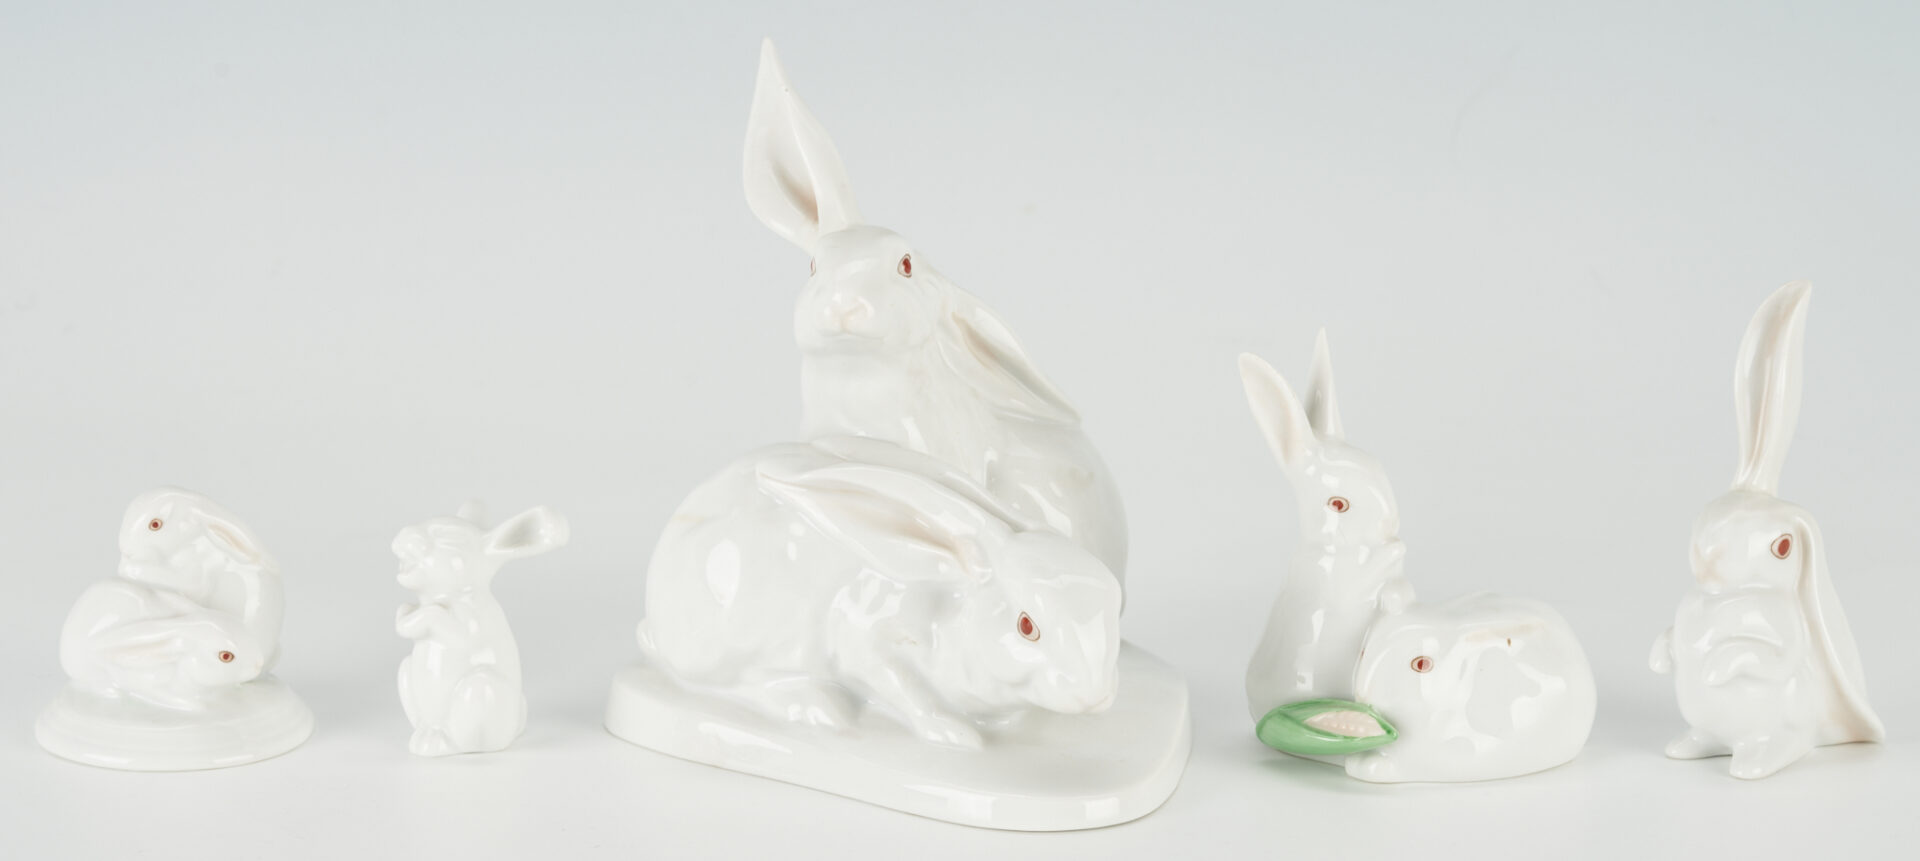 Lot 745: 7 Herend Porcelain Items & 1 Rosenthal, incl. Rabbit Figurines, Boxes